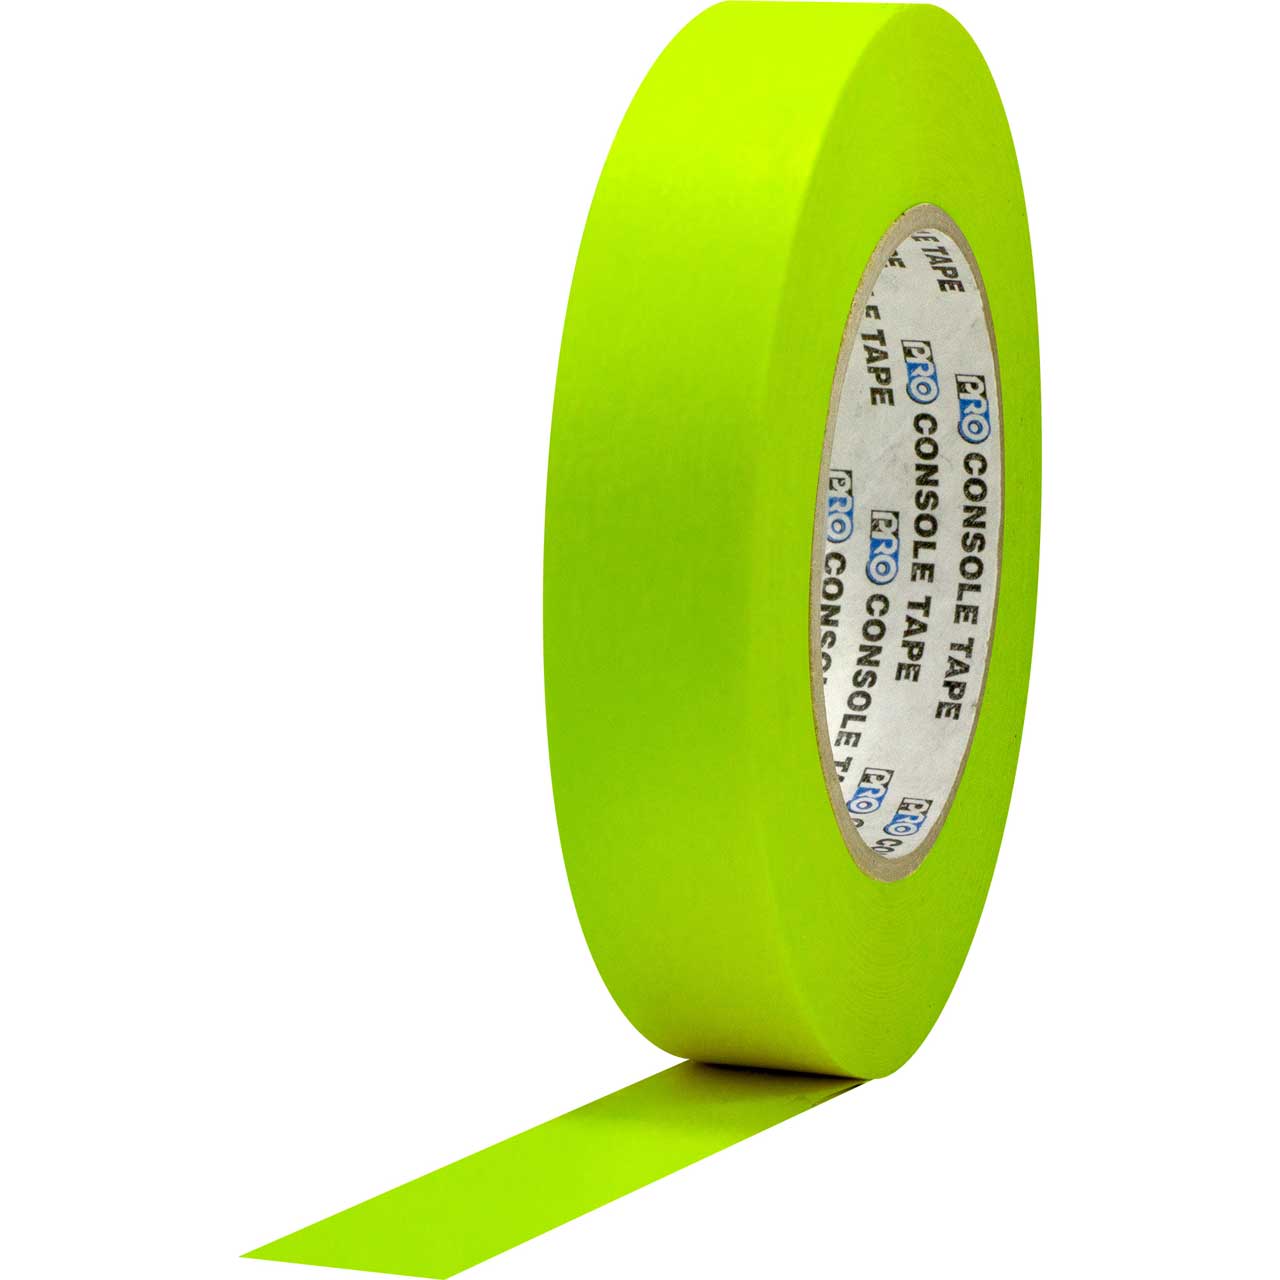 Pro Tapes Pro-Spike Spike Tape: 1/2 in x 45 yds. (Fluorescent